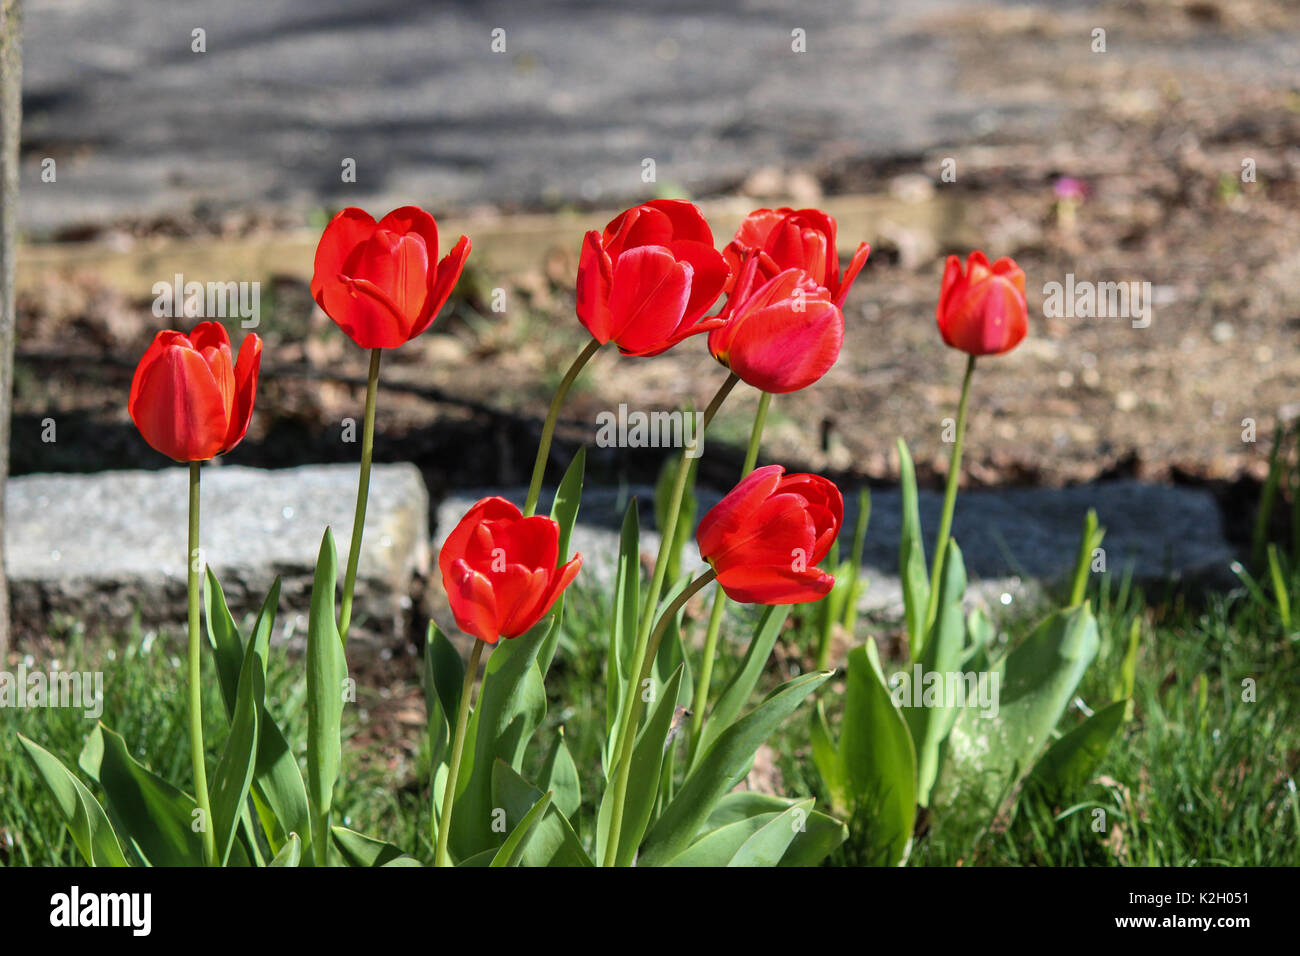 Red Tulips in Bloom Blurred Background Stock Photo